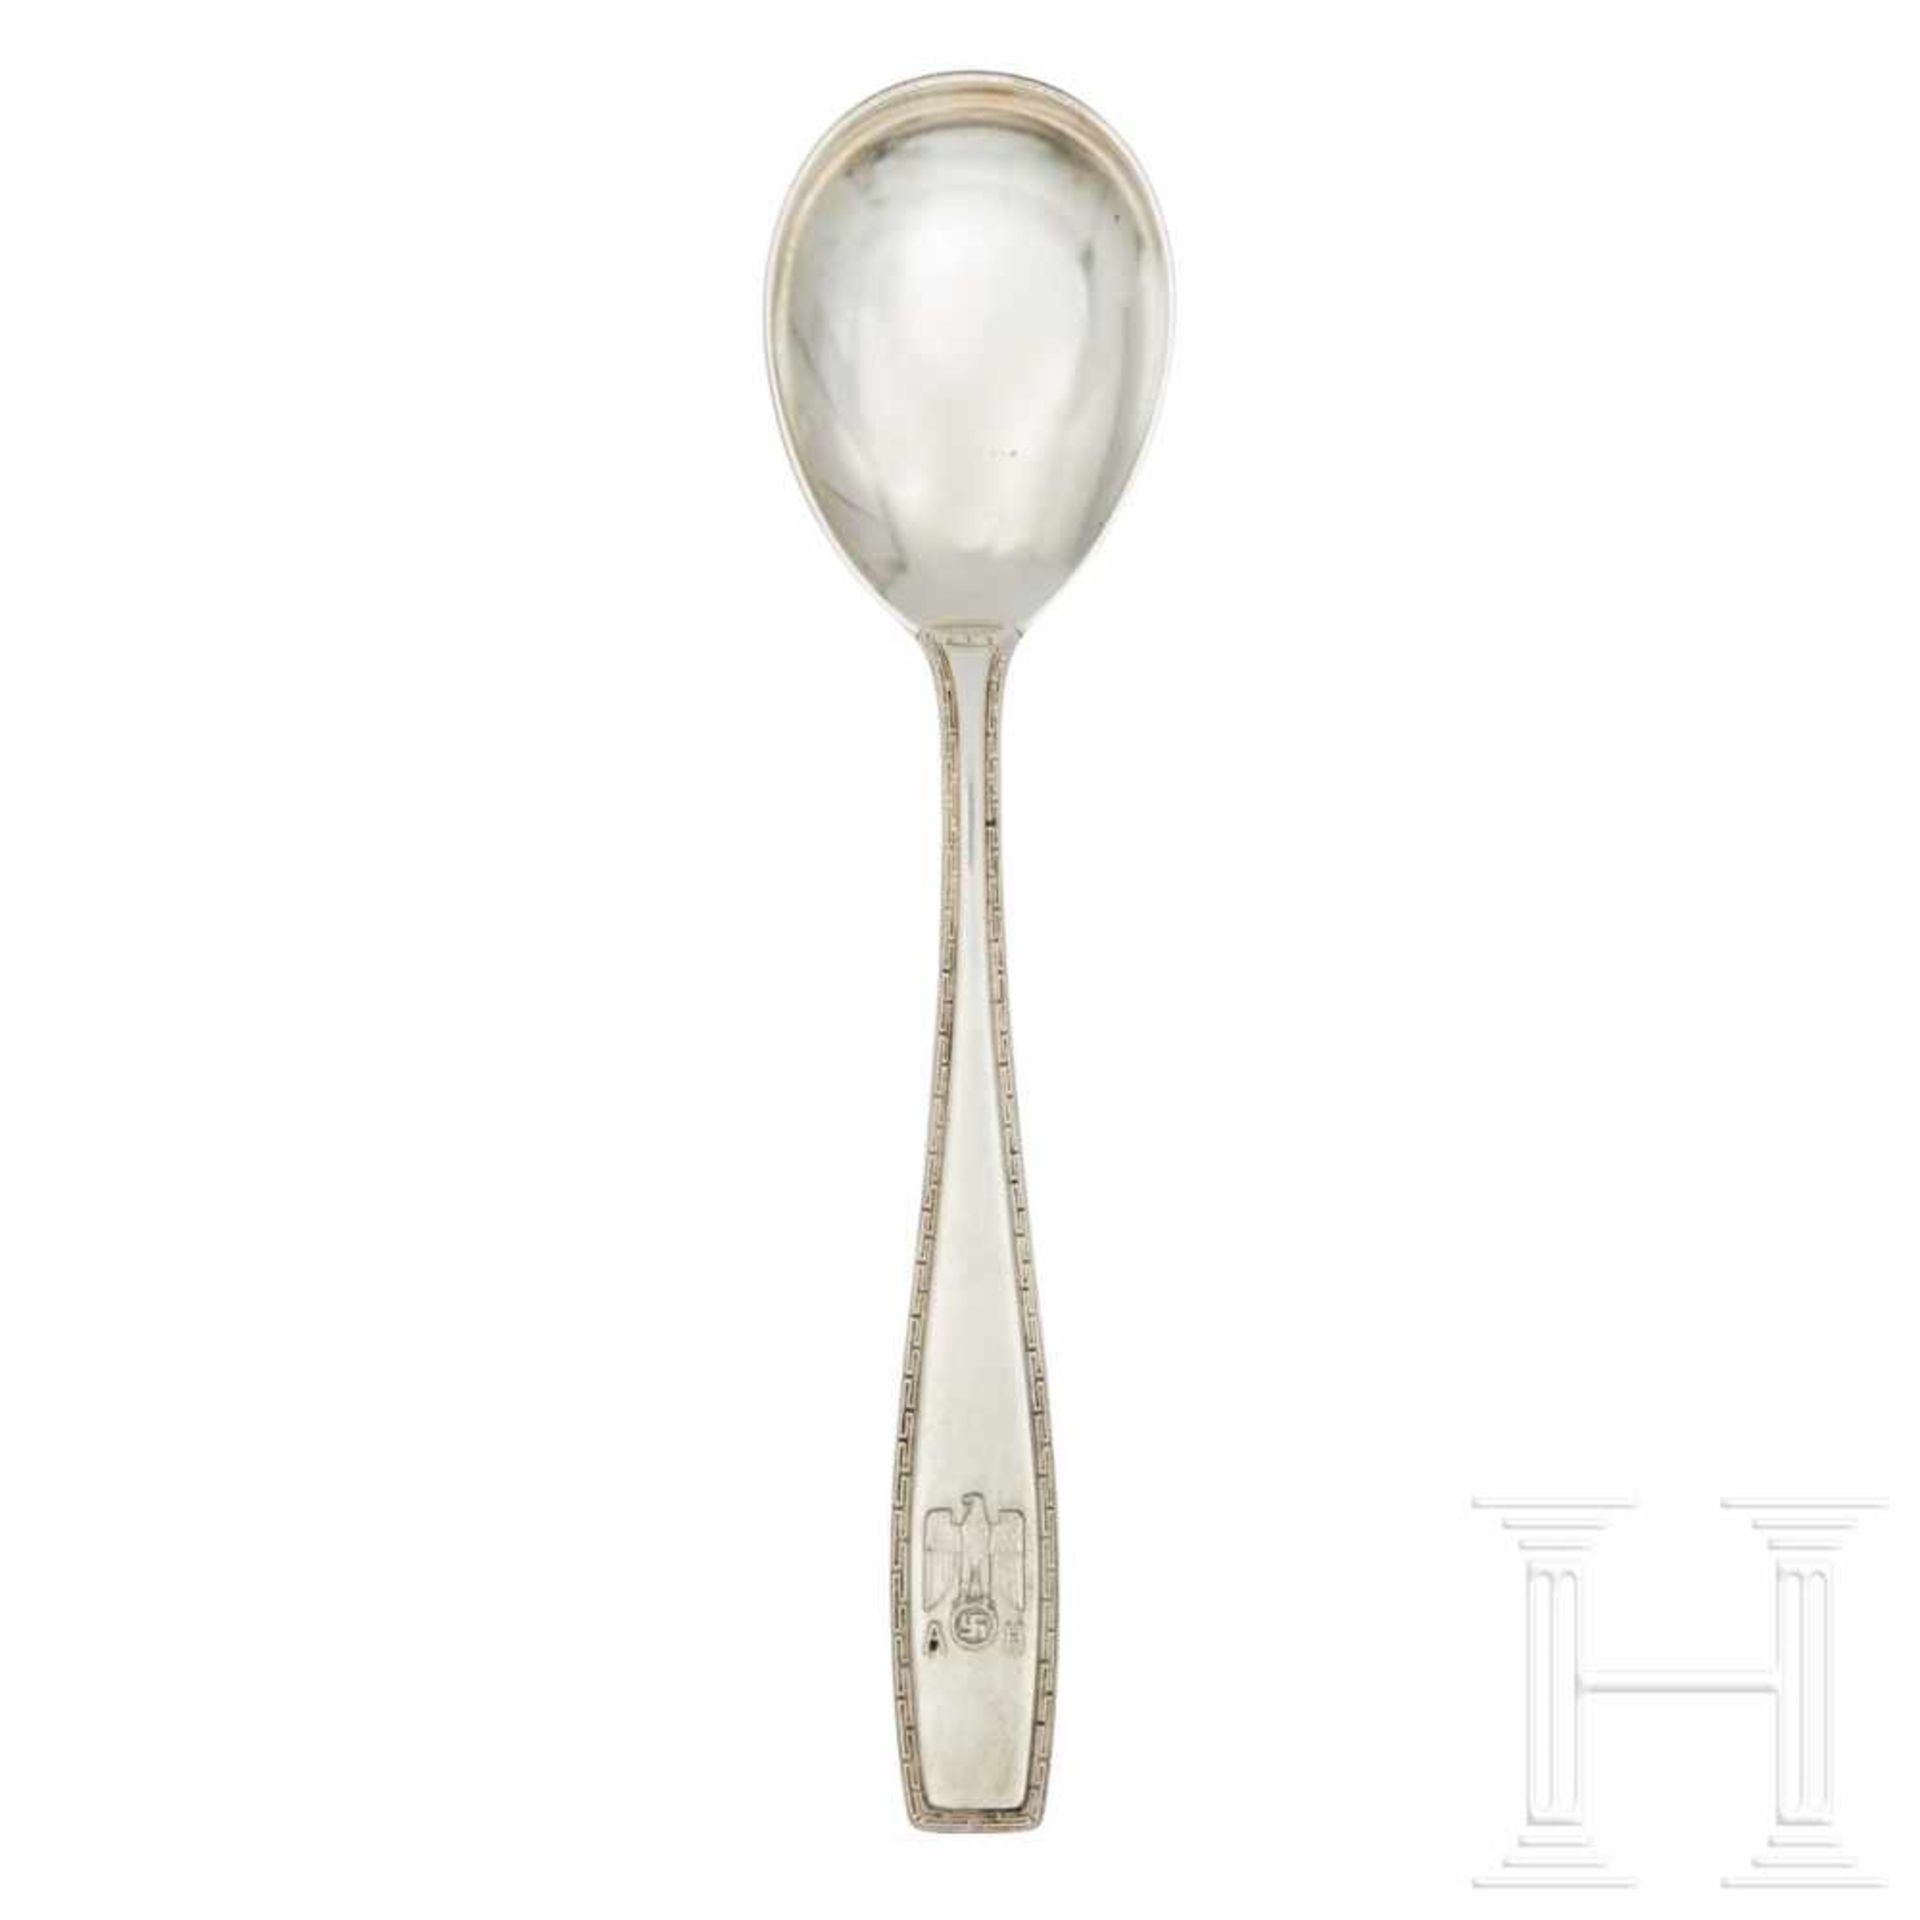 Adolf Hitler – an Ice Cream Spoon from his Personal Silver ServiceSo called “formal pattern” with